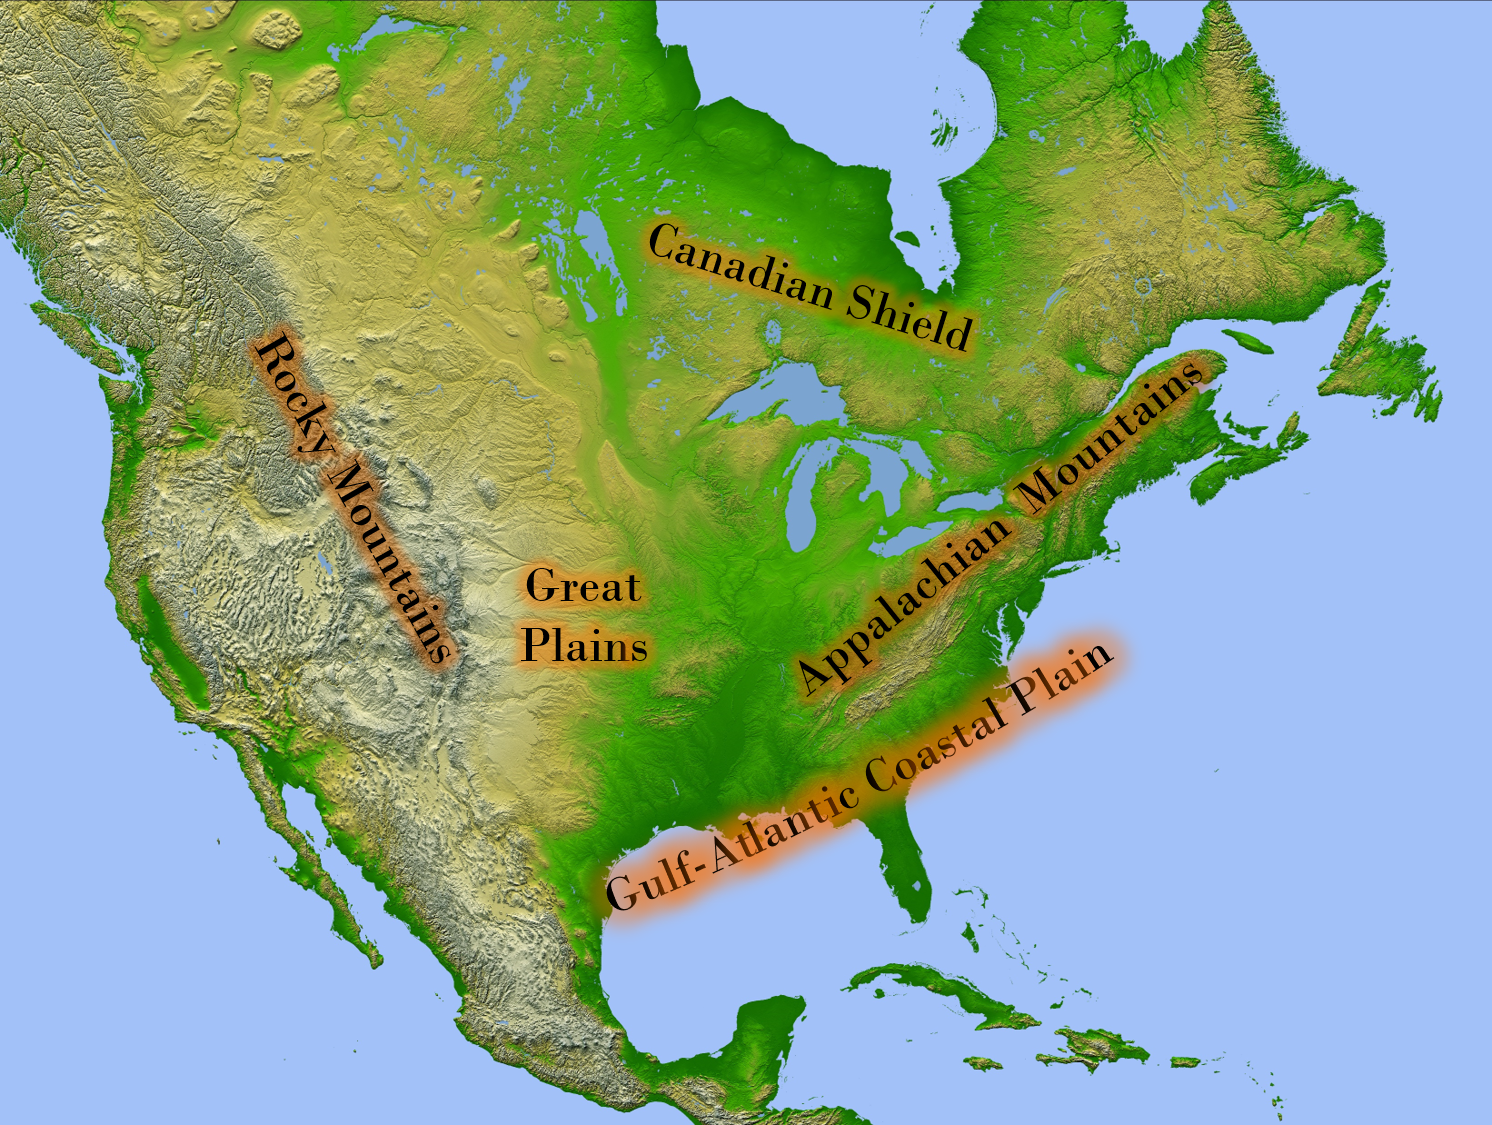 Five regions of North America labeled on a shaded relief map